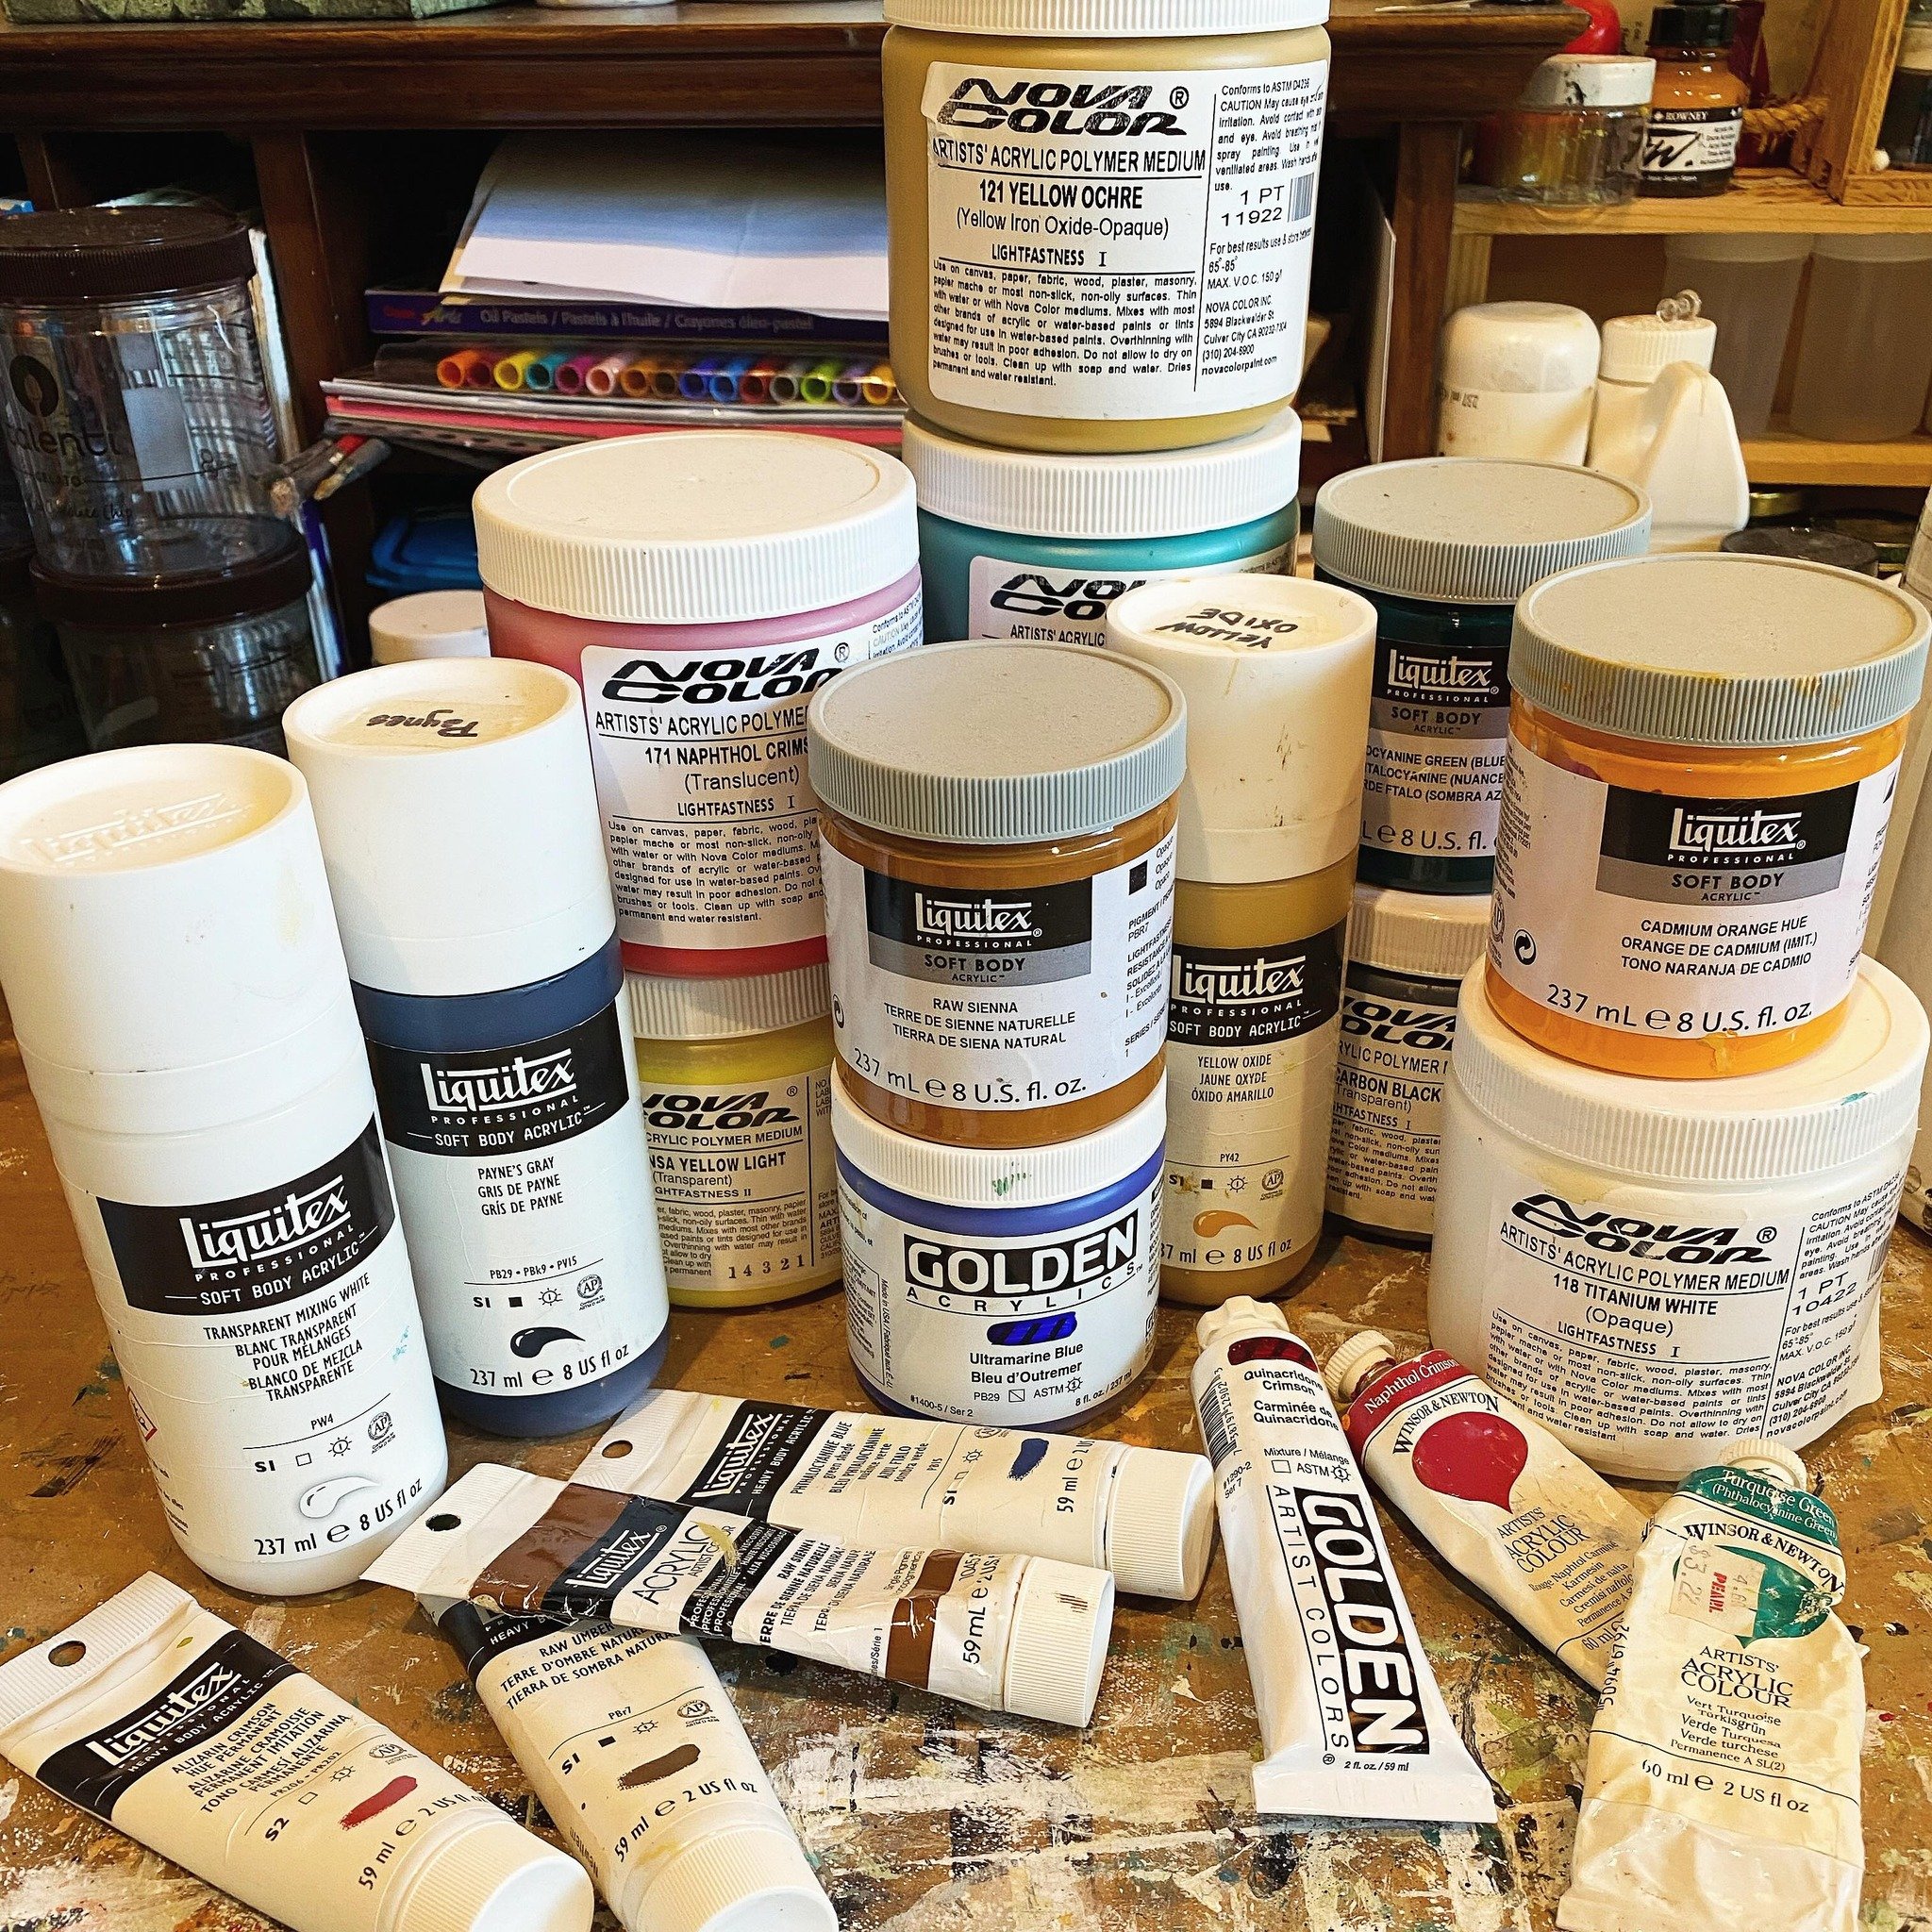 WHAT&rsquo;S YOUR FAVORITE PAINT? Most artists have a favorite paint. For decades, Liquitex was my go to paint. Once in a while I might buy a Windsor &amp; Newton or Golden color. Now I&rsquo;m in love with Nova Color Paints. They just seem so luscio